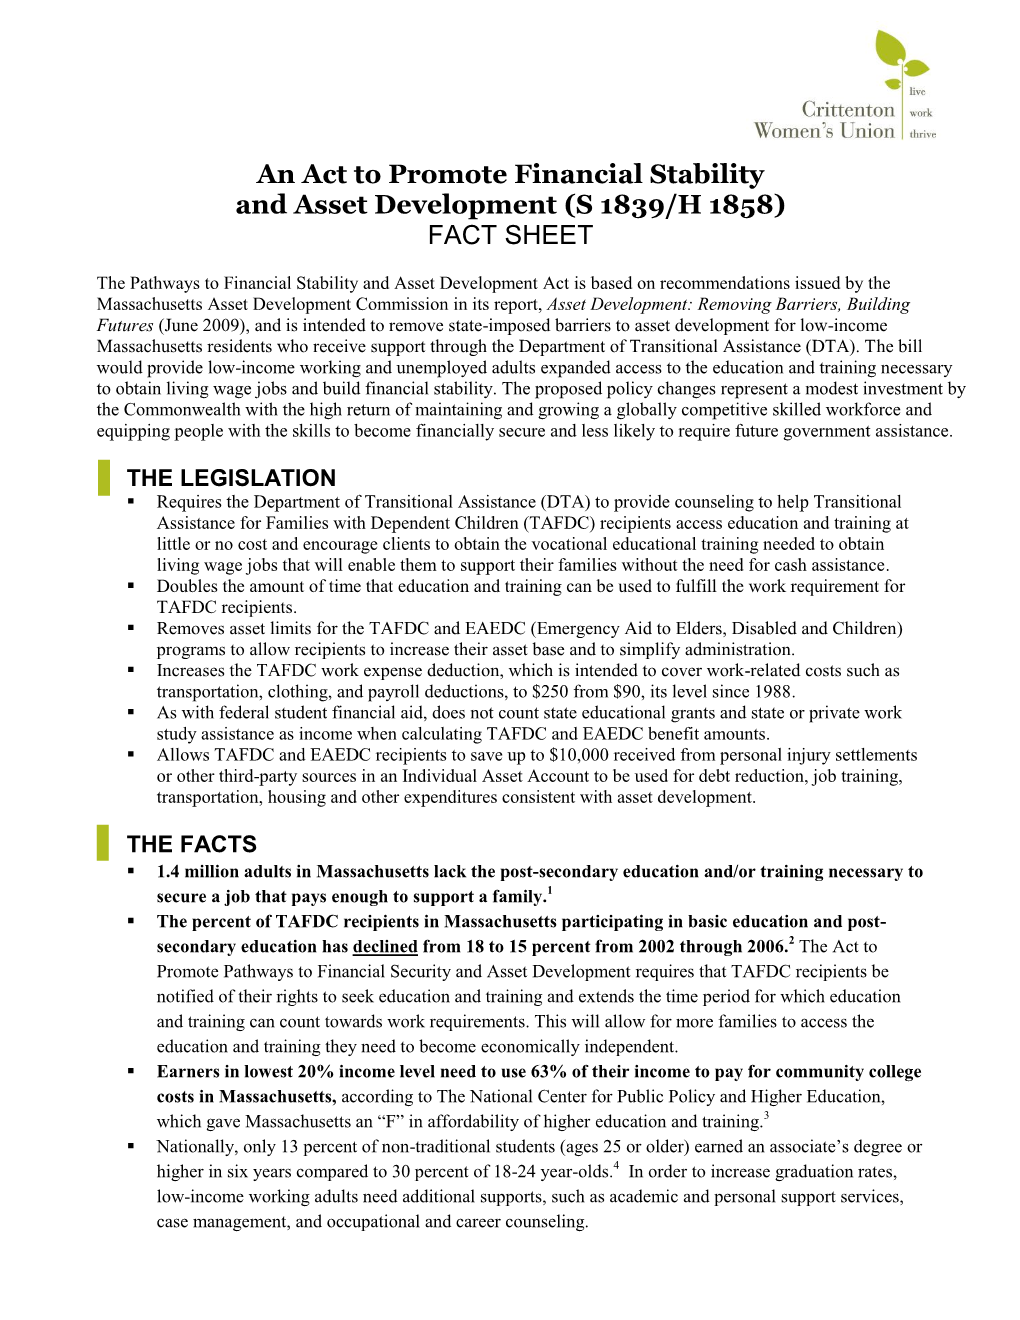 An Act to Promote Financial Stability and Asset Development (S 1839/H 1858) FACT SHEET